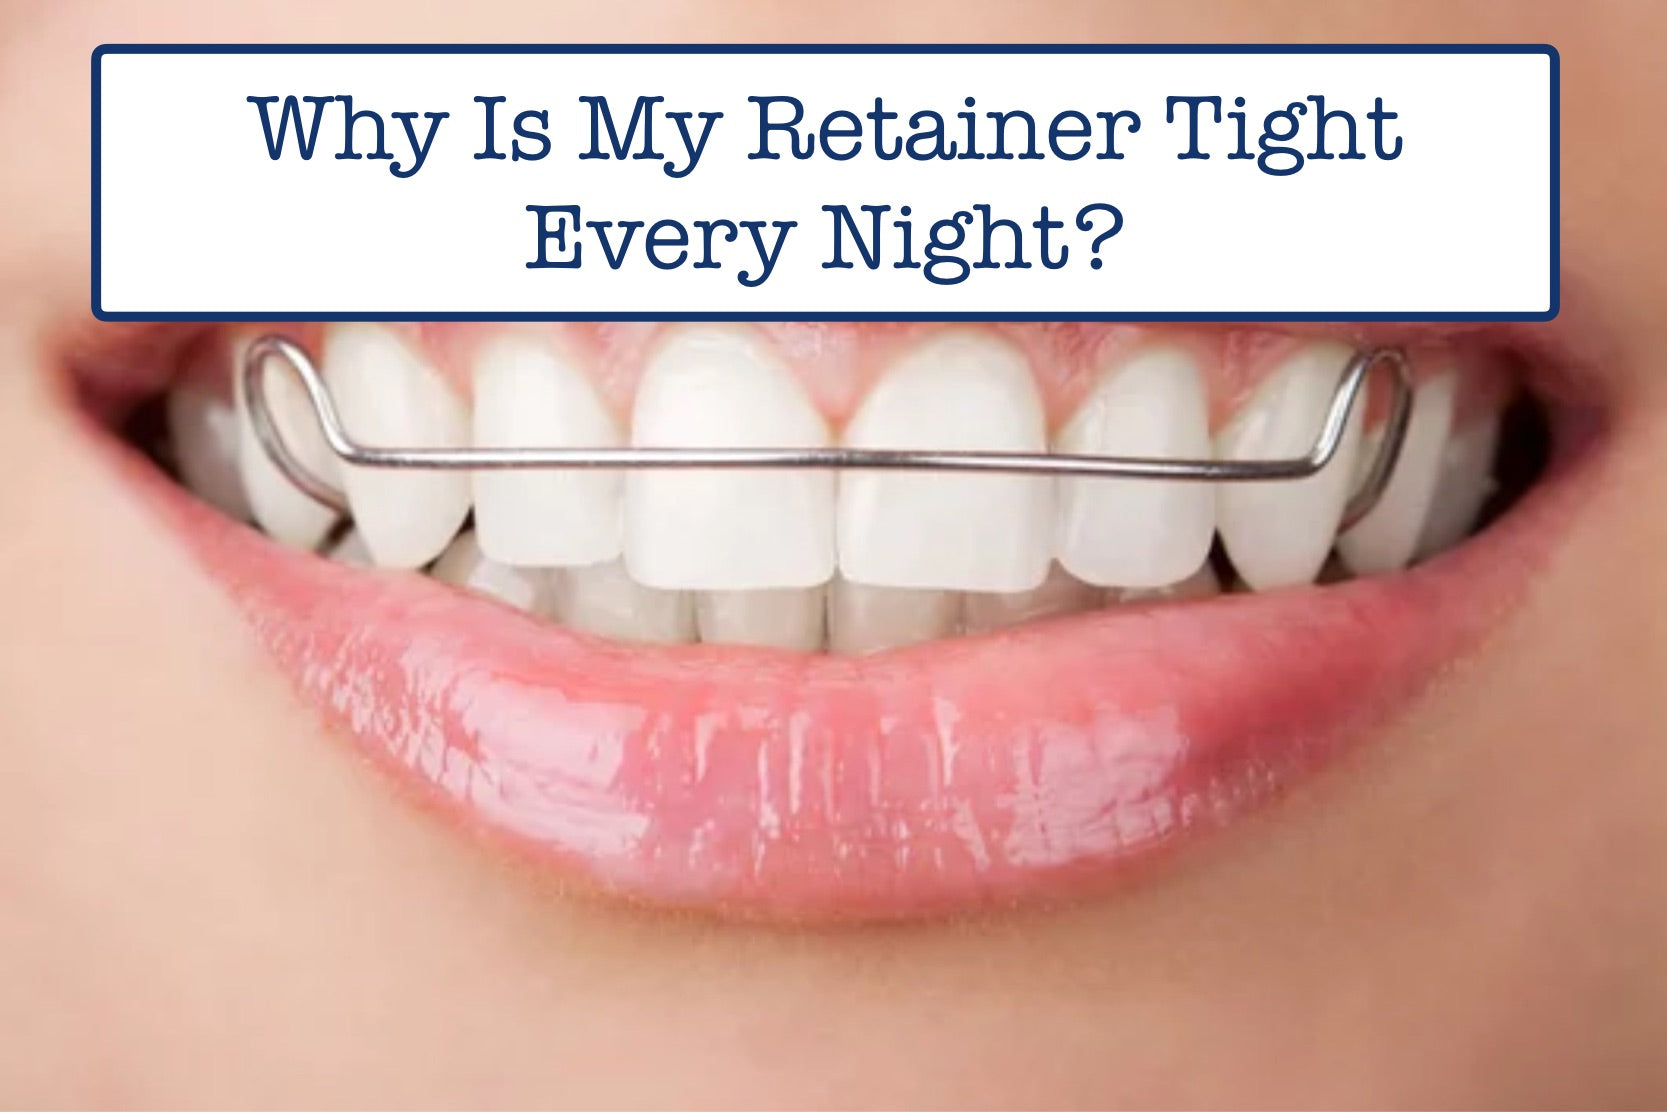 Braces Guide: Should I Wear My Retainer if It's Tight?